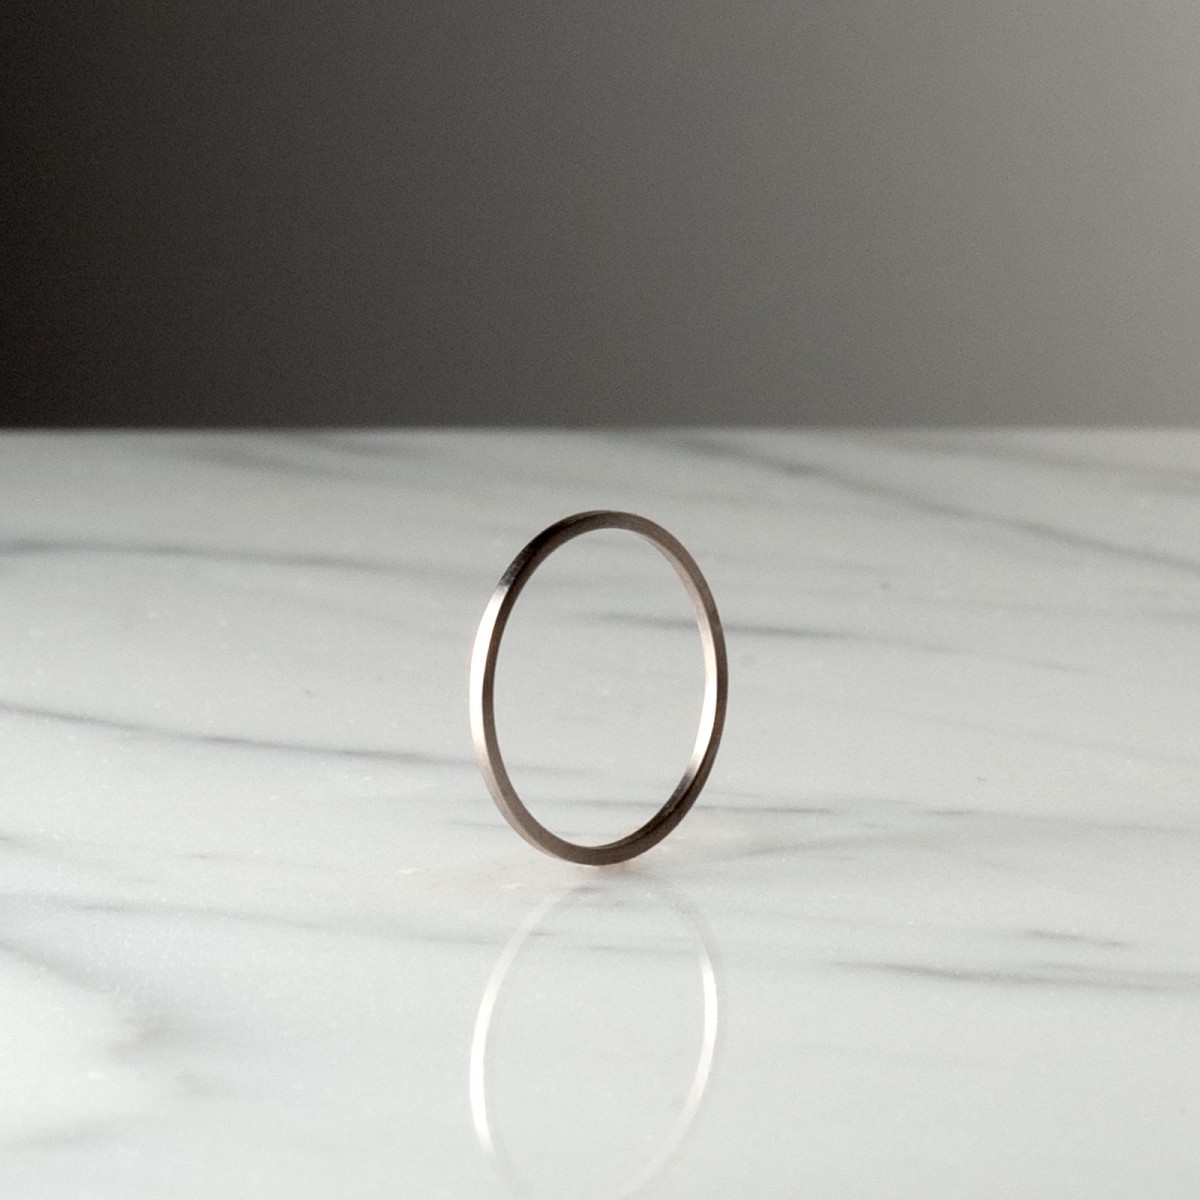 CARRÉ 1X1 2057 - Wedding ring handmade in France